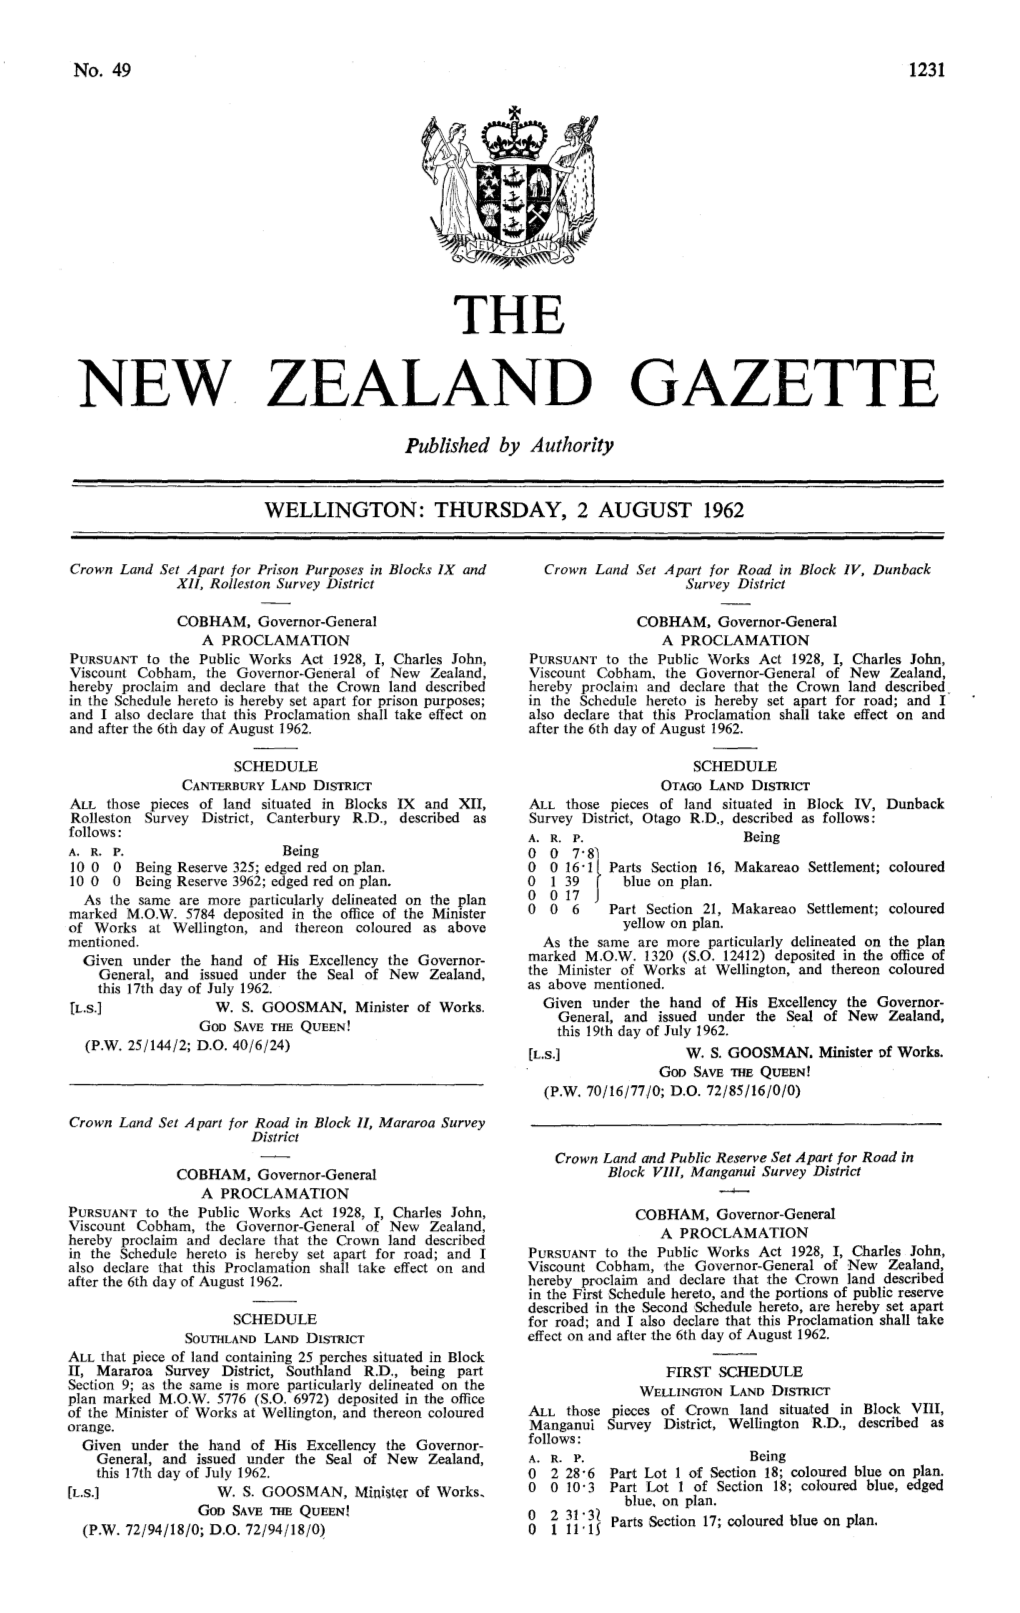 No 49, 2 August 1962, 1231